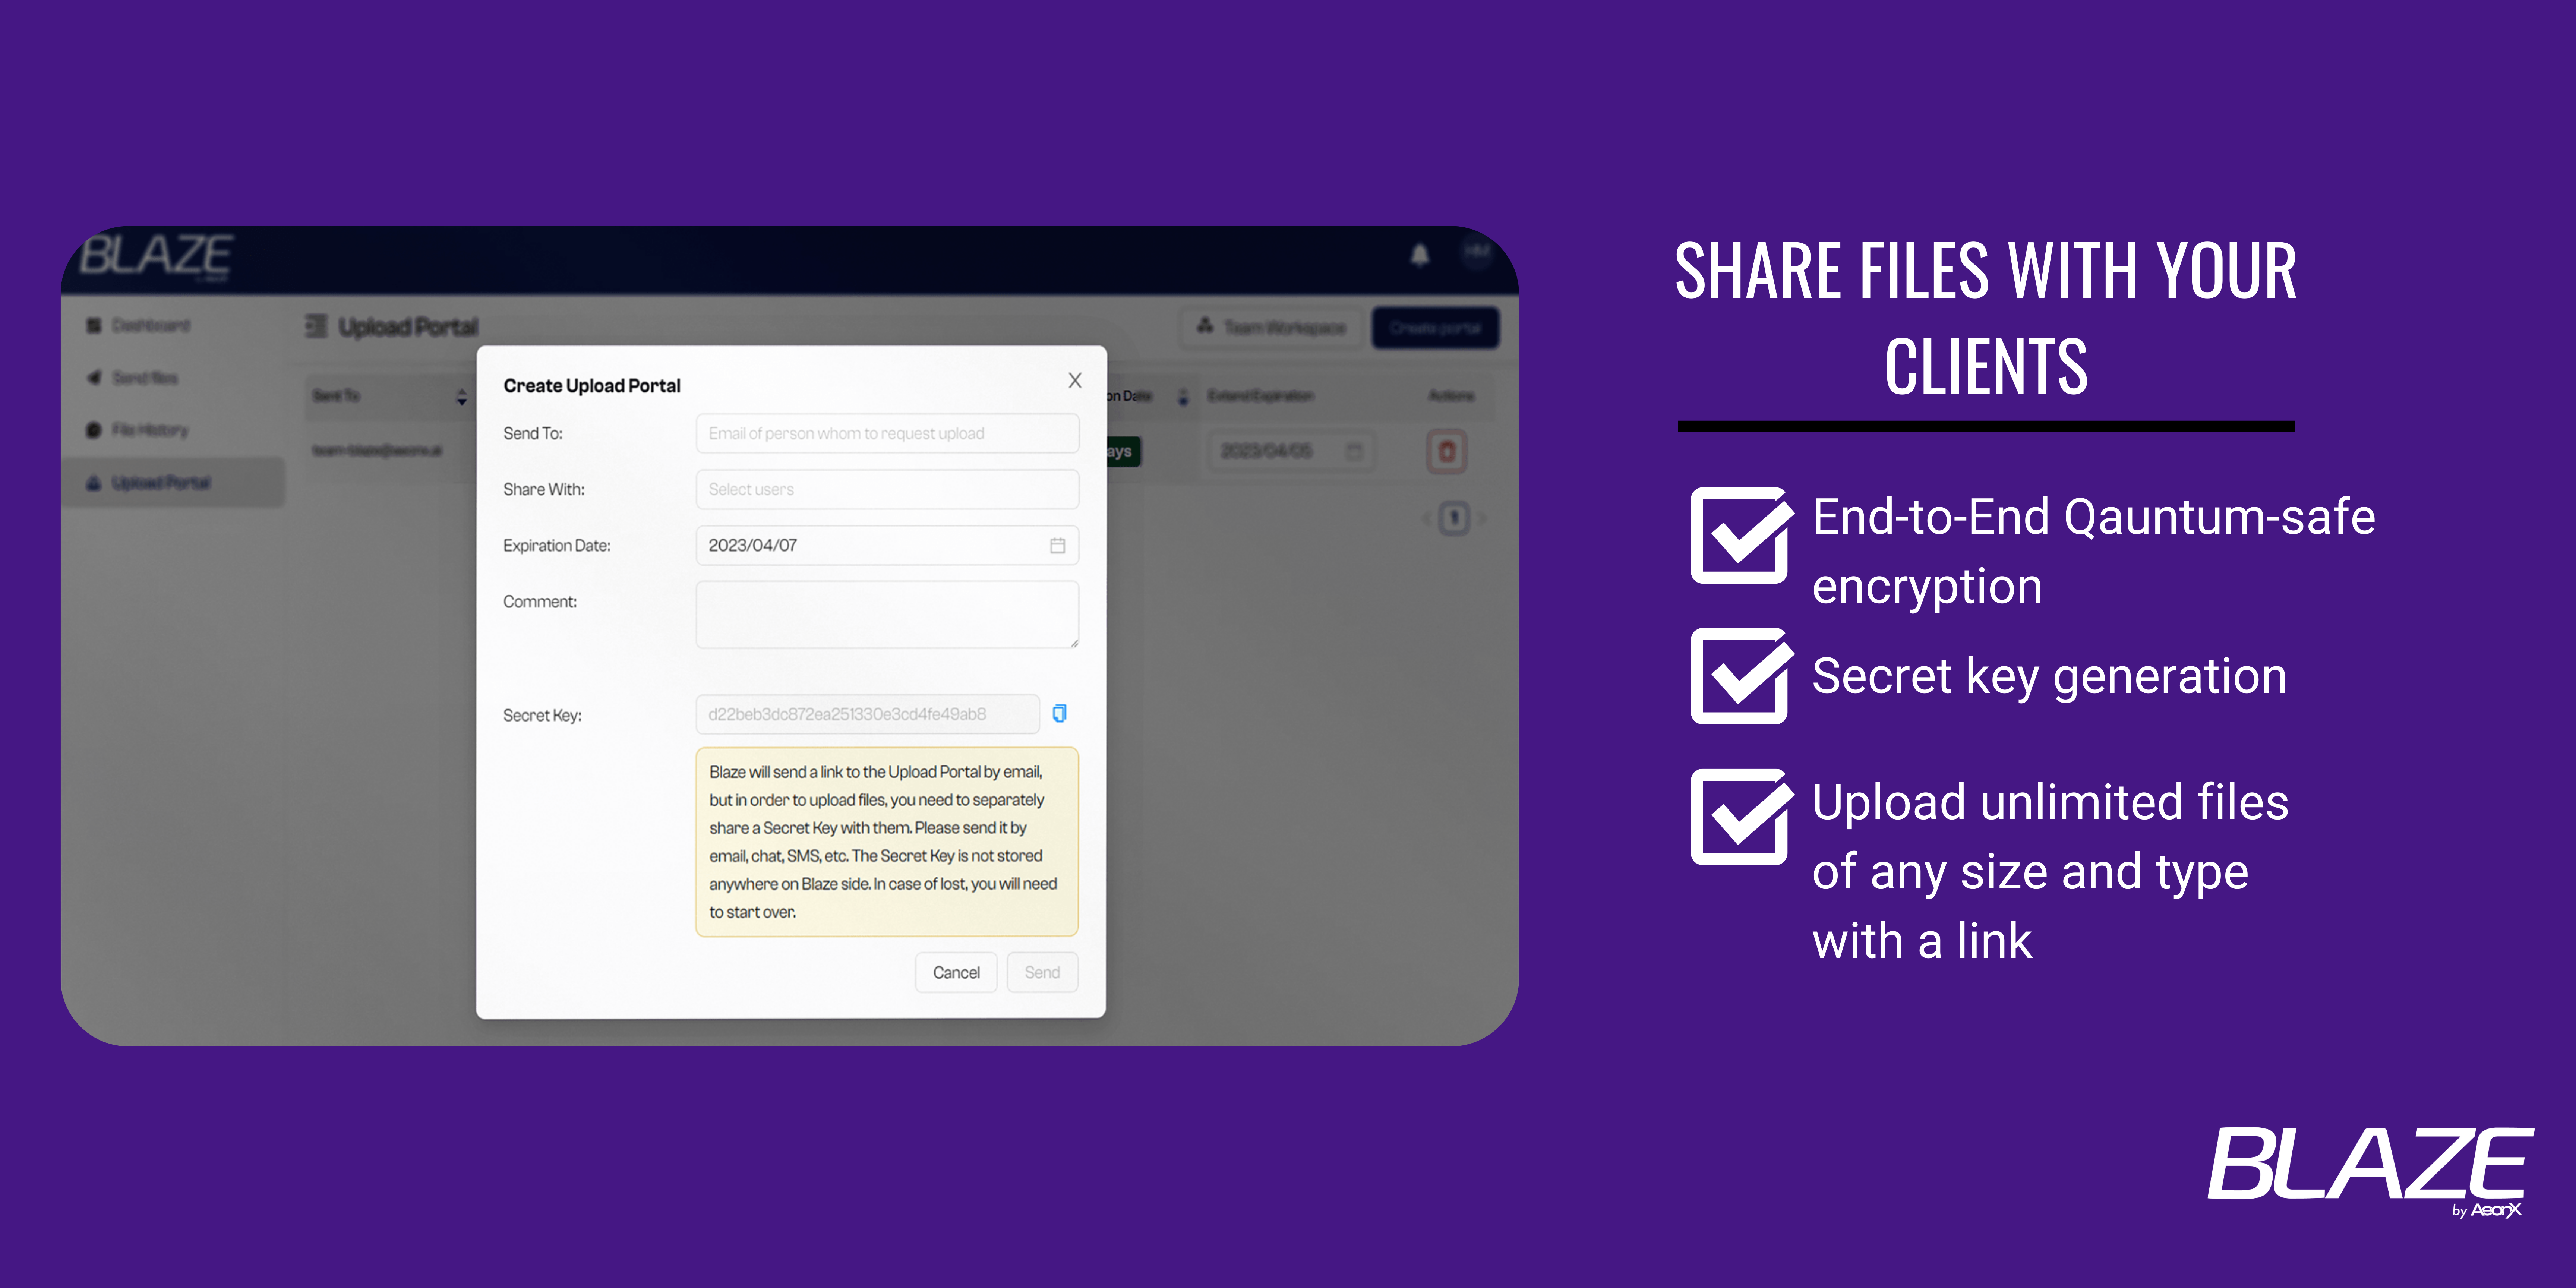 Share files with your clients